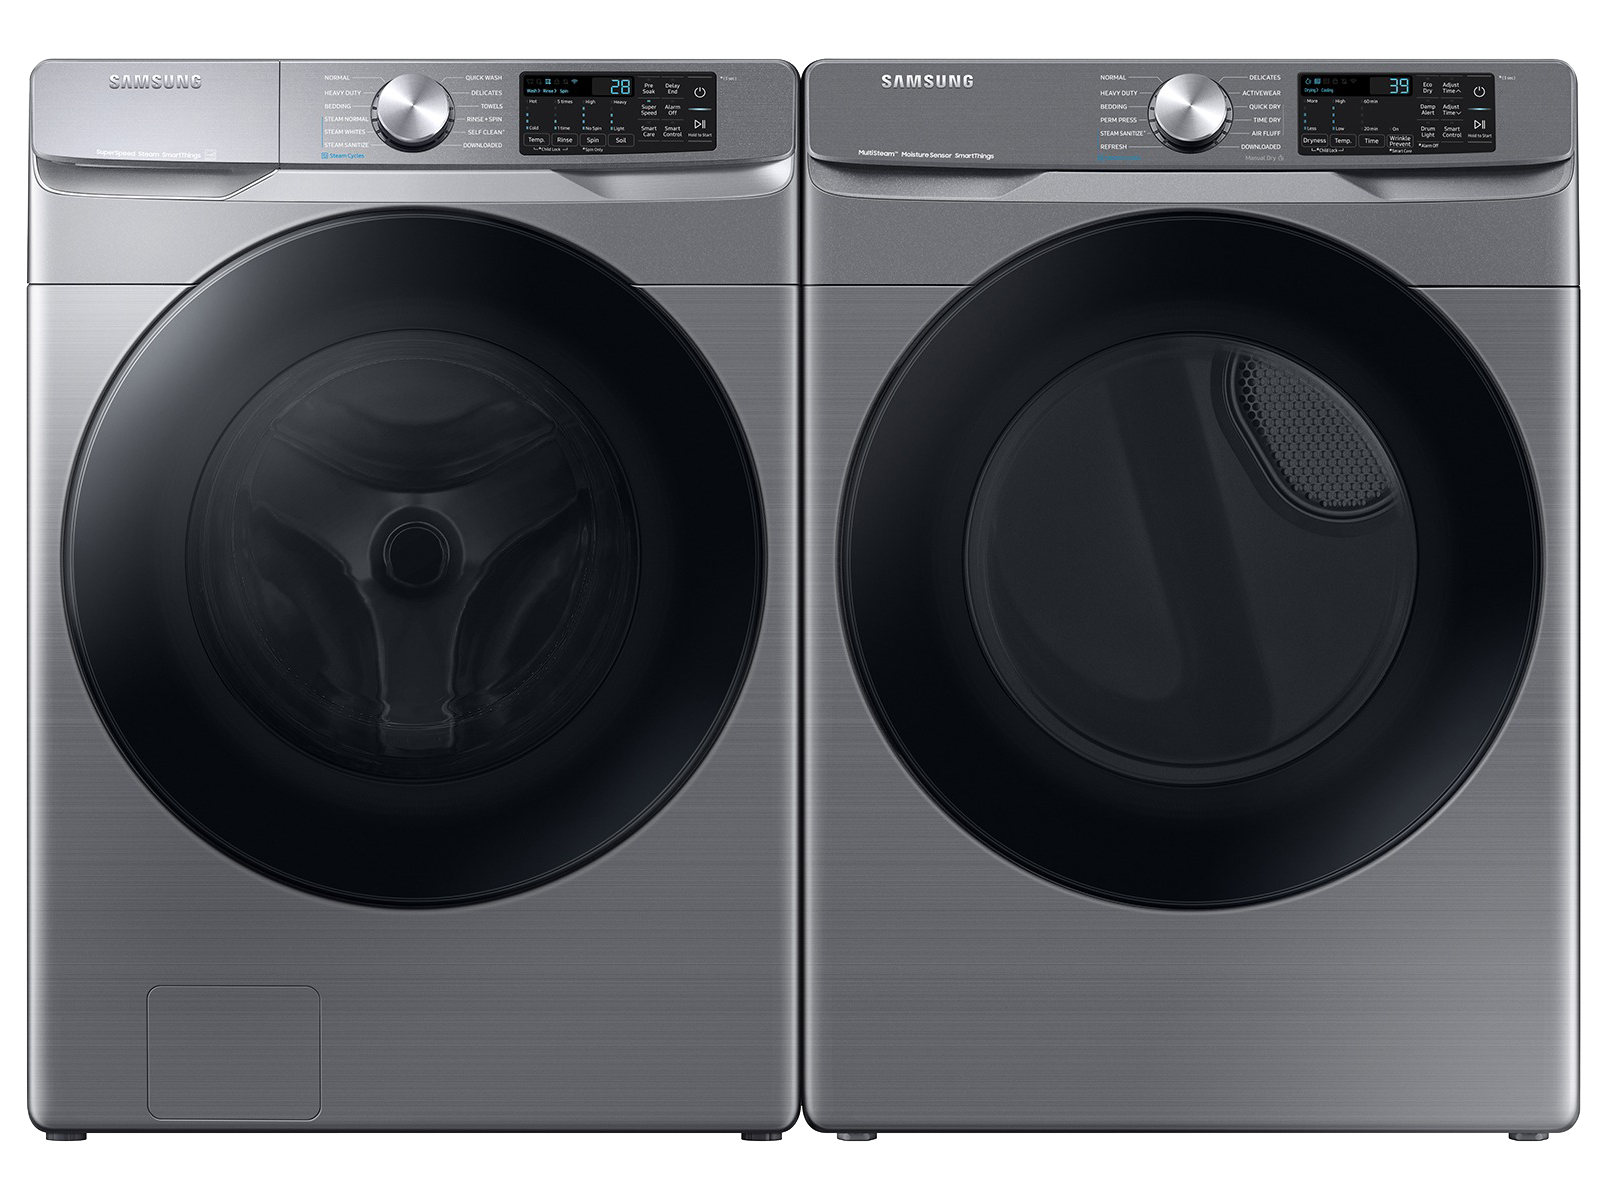 Samsung Large Capacity Smart Front Load Washer with Super Speed Wash & Smart Electric Dryer with Steam Sanitize+ in Platinum(BNDL-1651774560331)